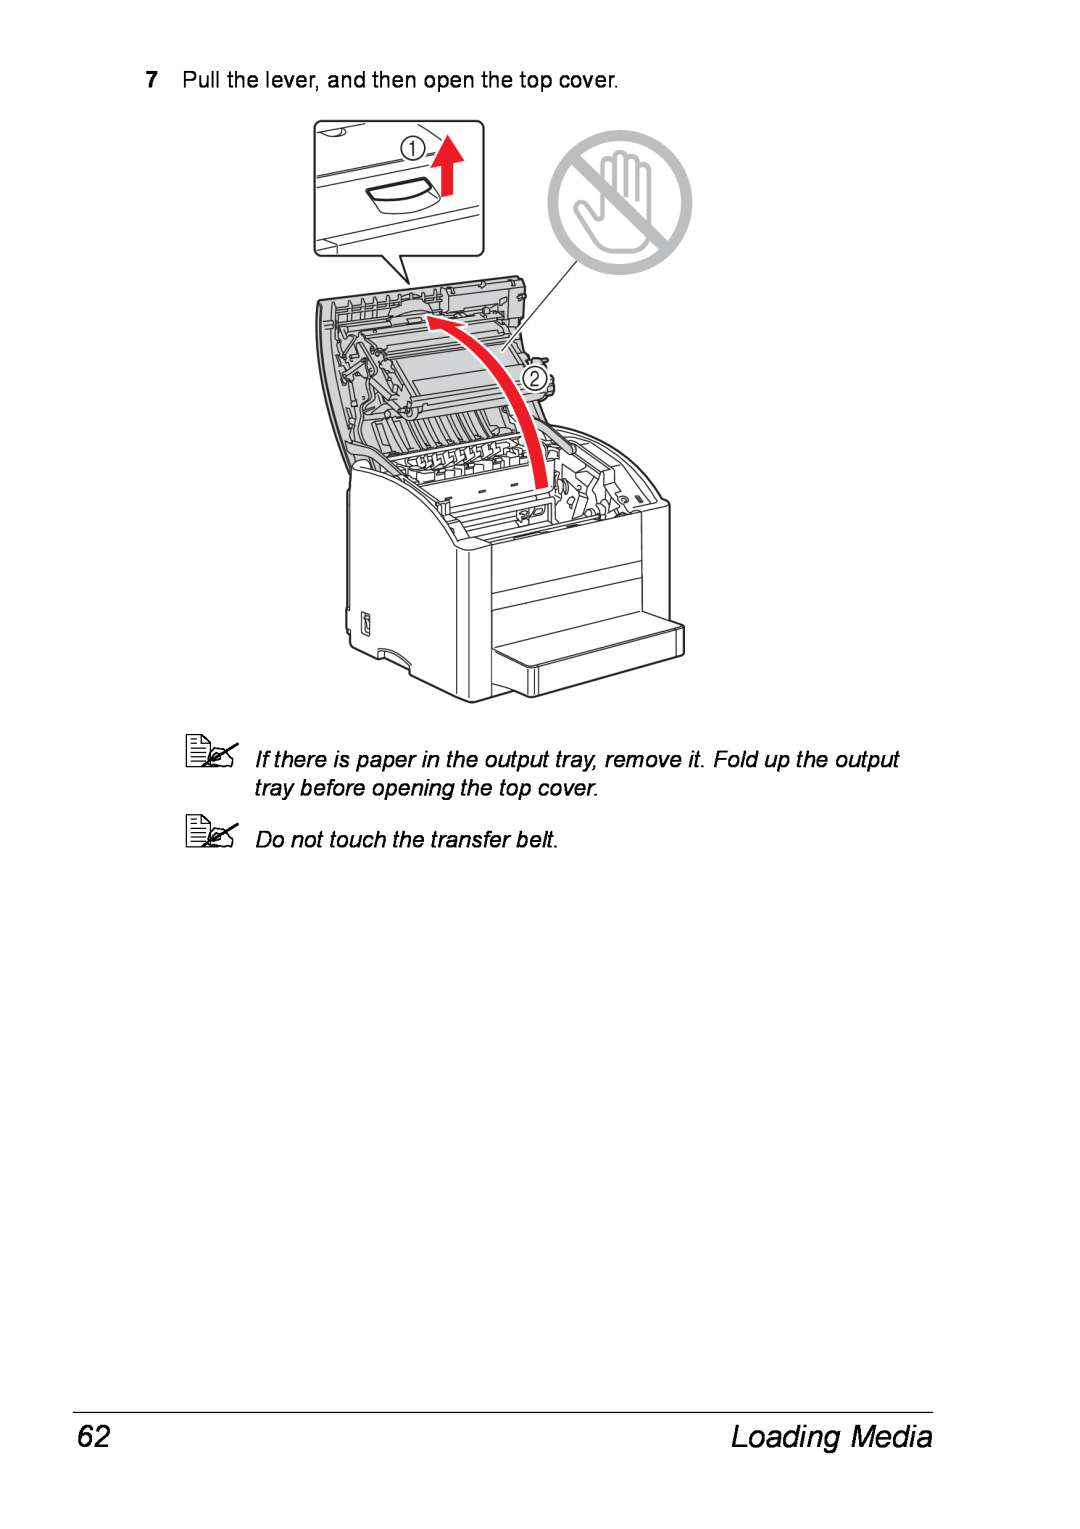 Xerox 6120 manual Loading Media, Pull the lever, and then open the top cover,  Do not touch the transfer belt 